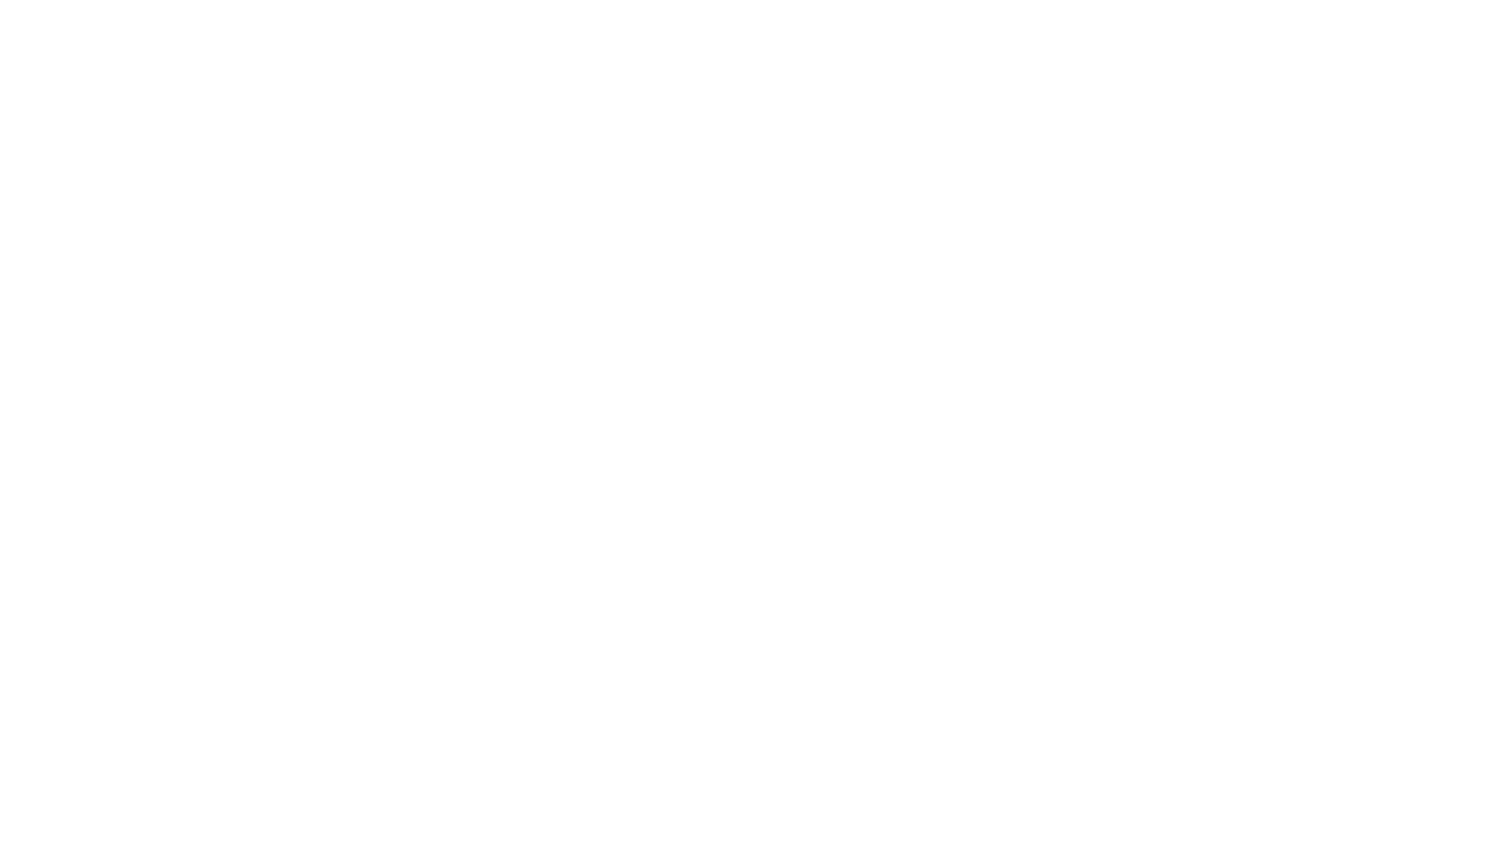 Media and Data Equity (MADE) Lab